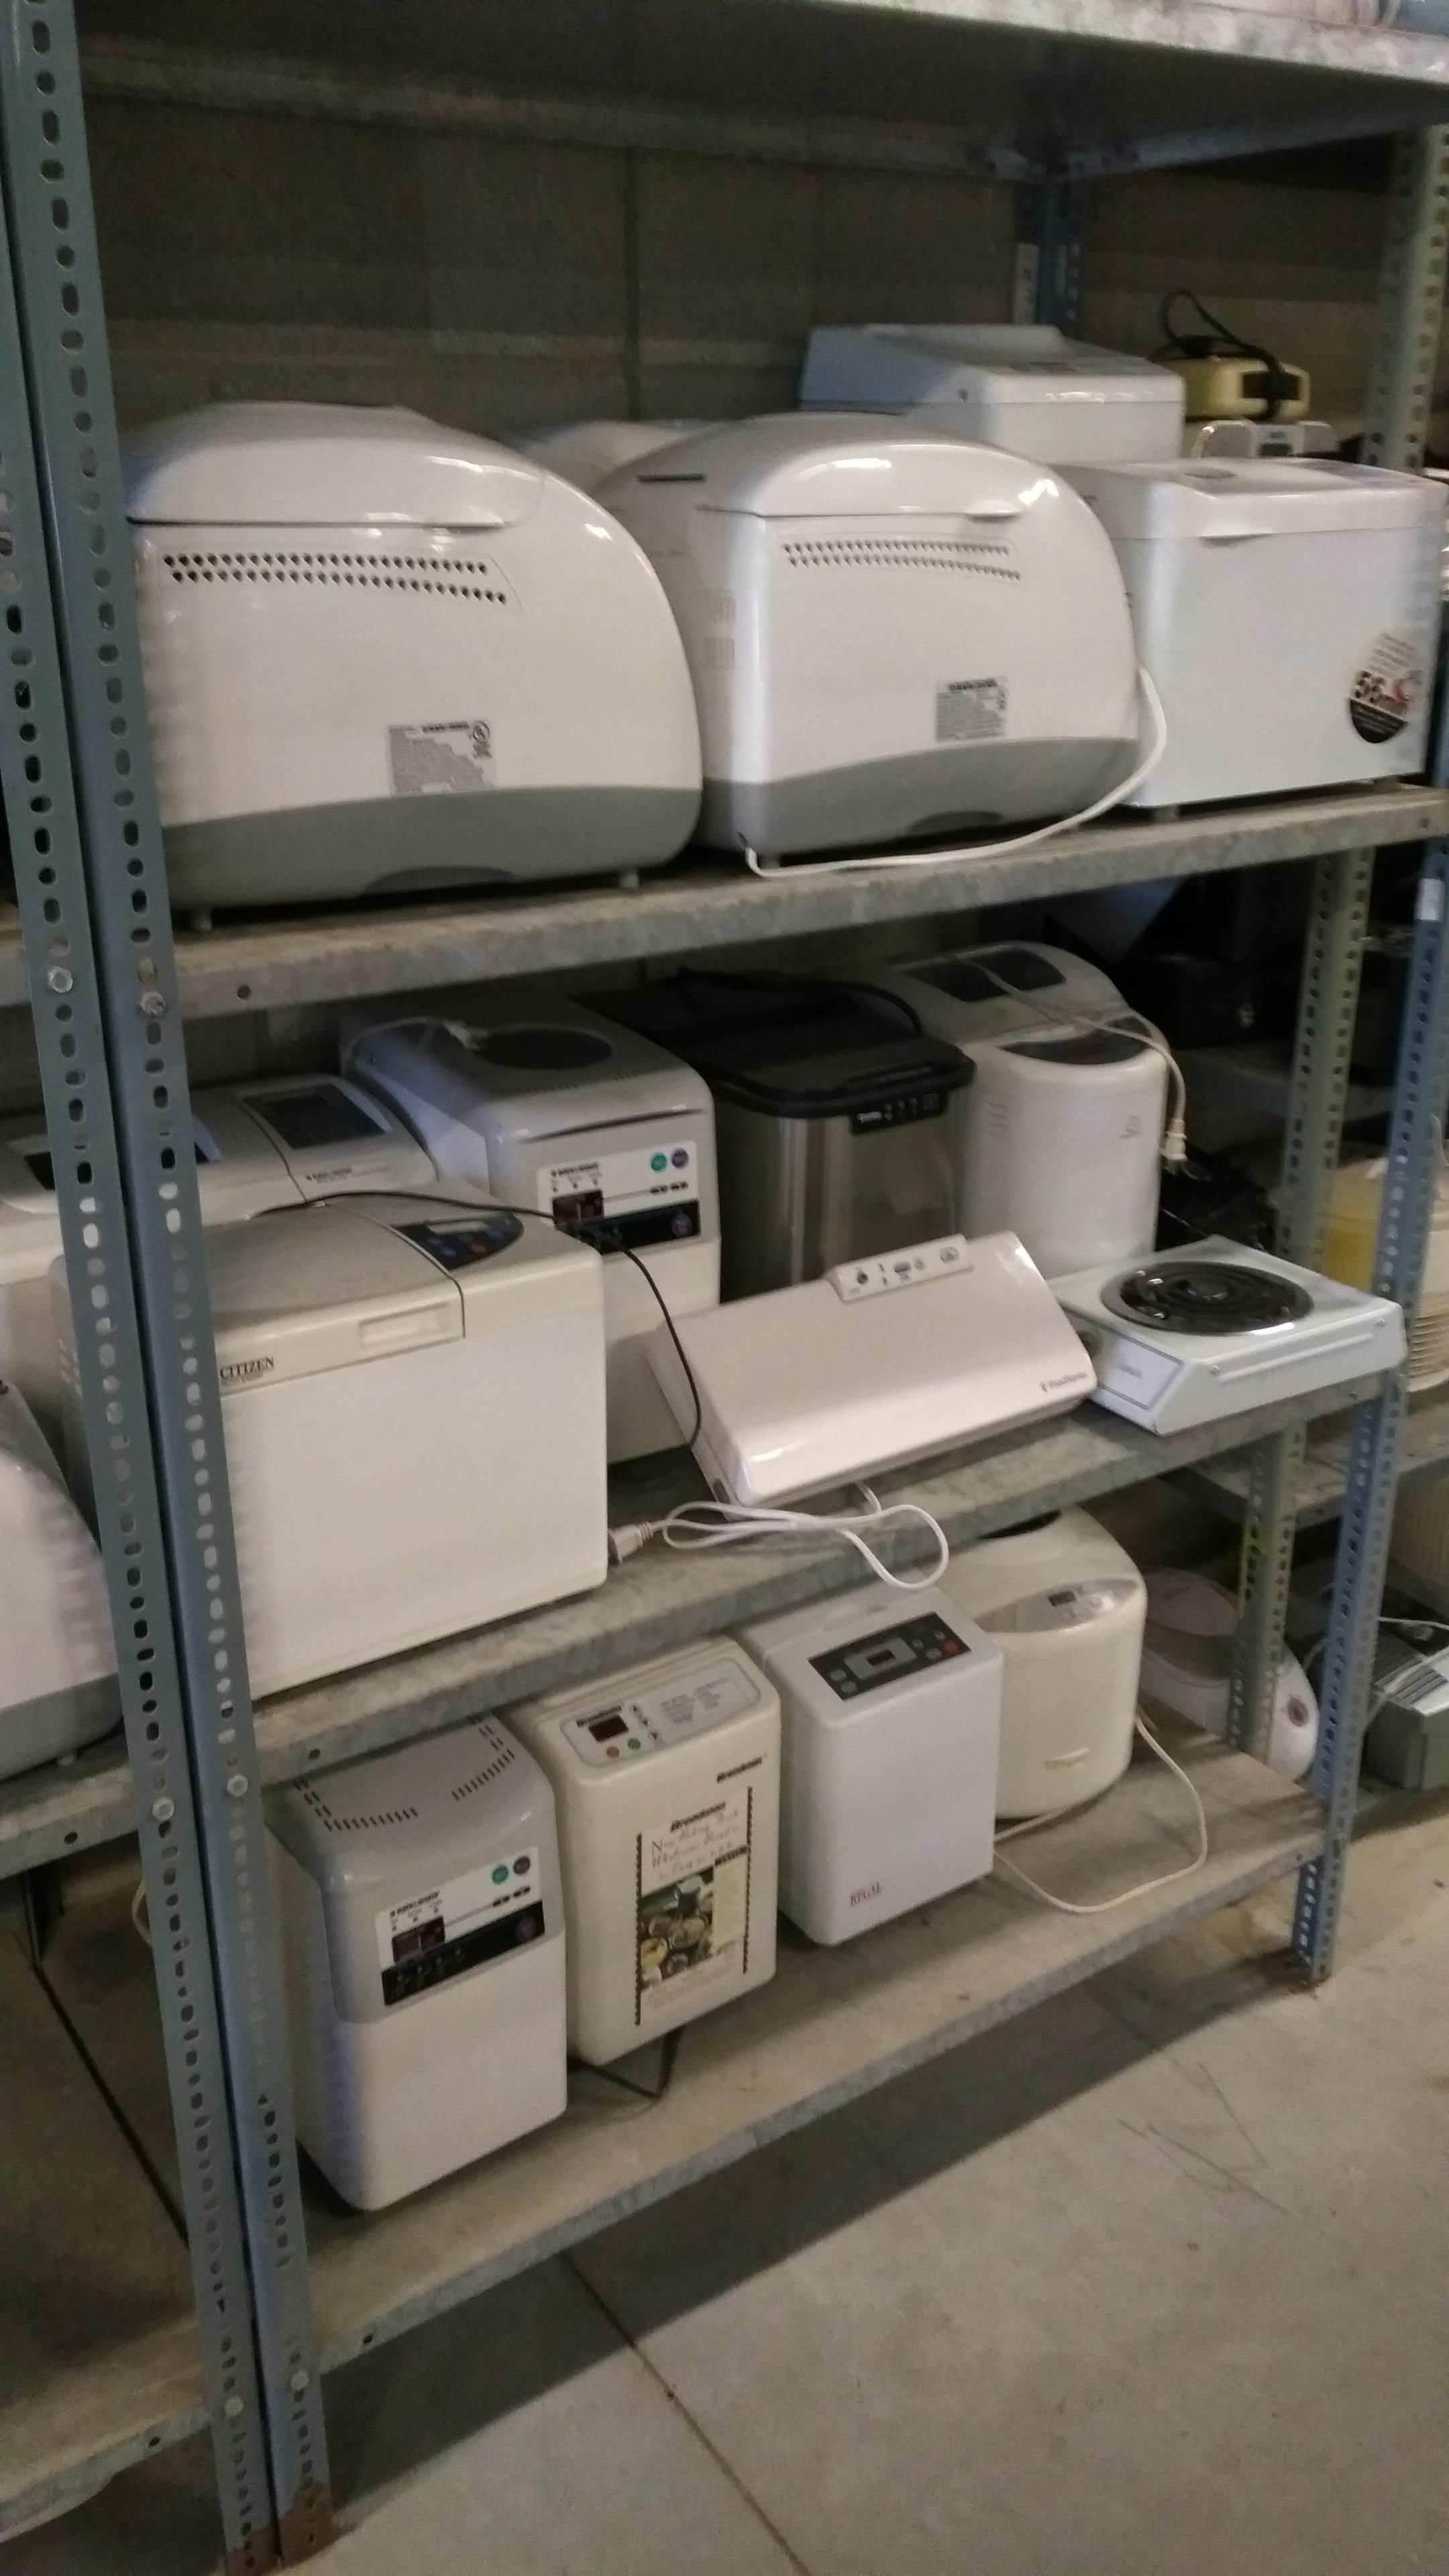 Second hand stores: Where bread machines go to die.